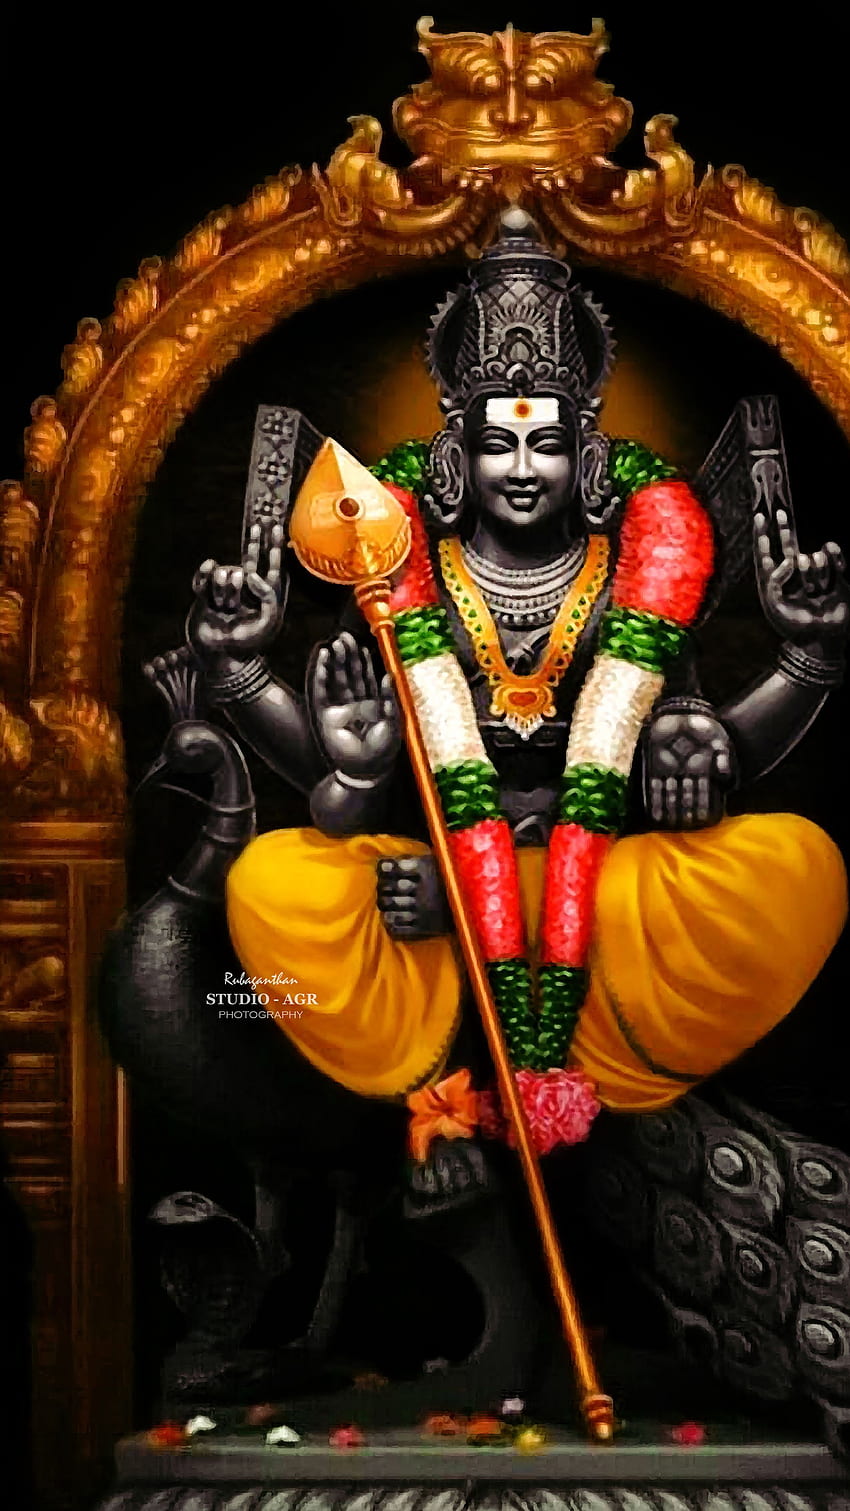 Incredible Compilation of Subramanya Swamy Images – Over 999 High-Quality Photos in Stunning 4K